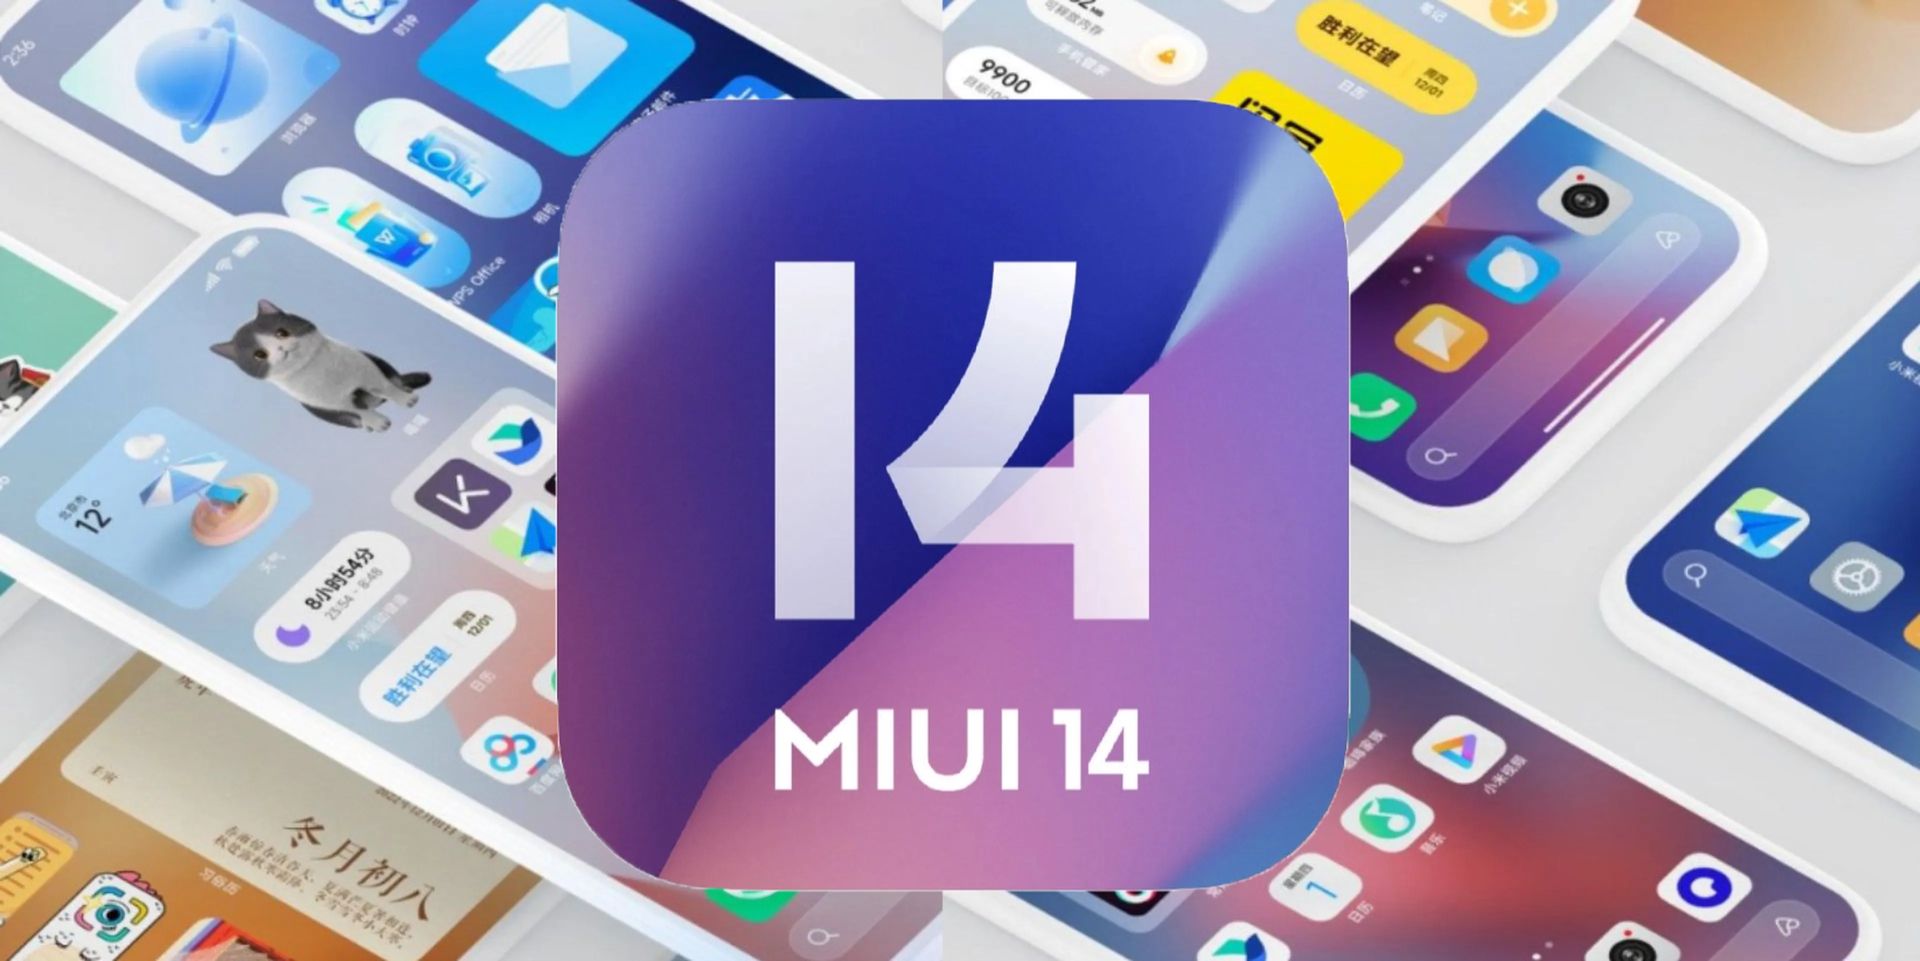 MIUI 14 supported devices, new features, and more